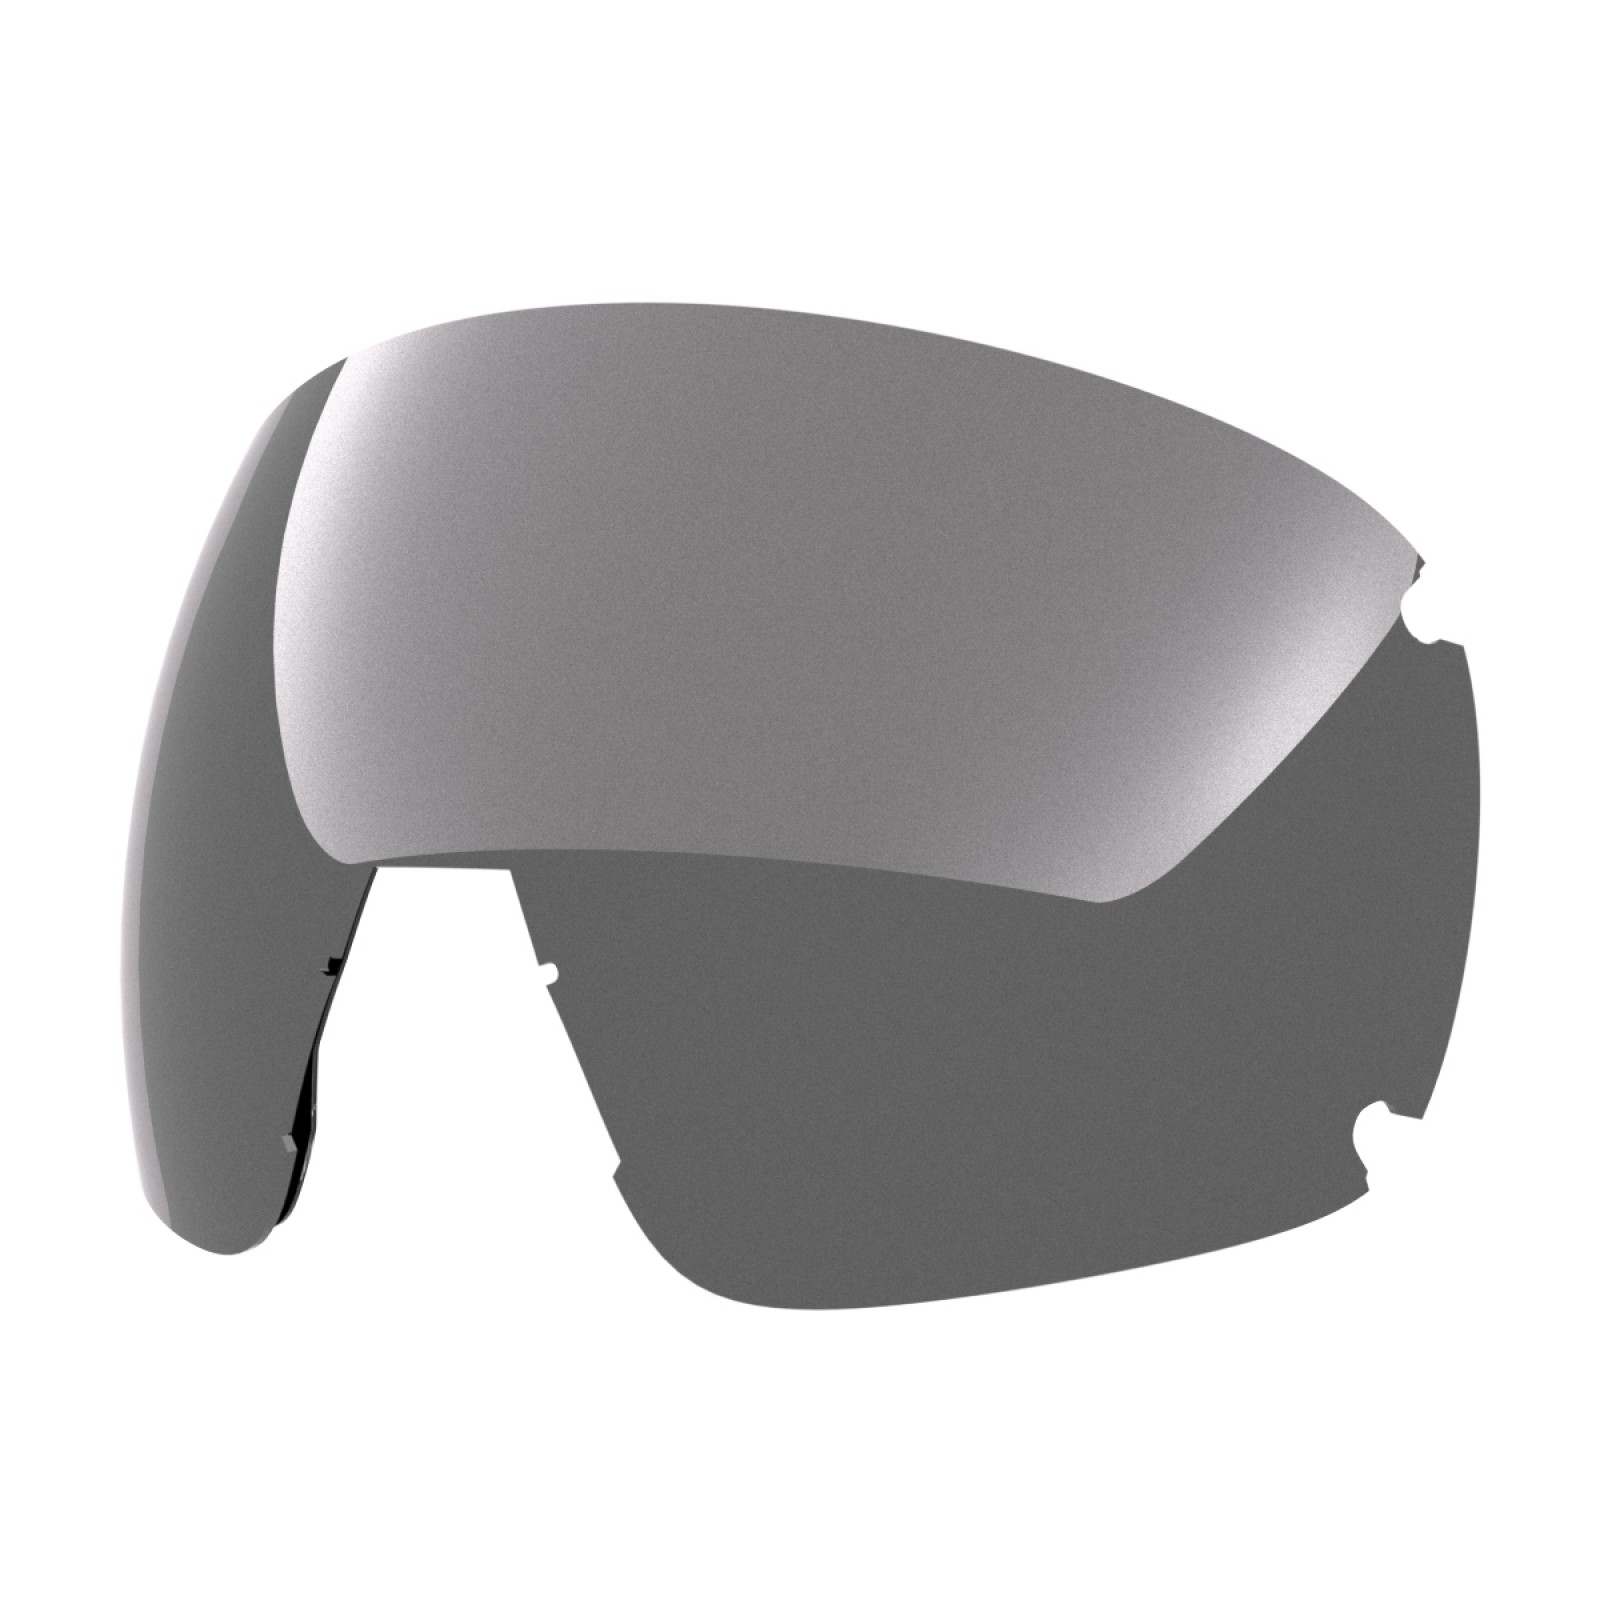 SILVER LENS FOR EARTH SNOW GOGGLE